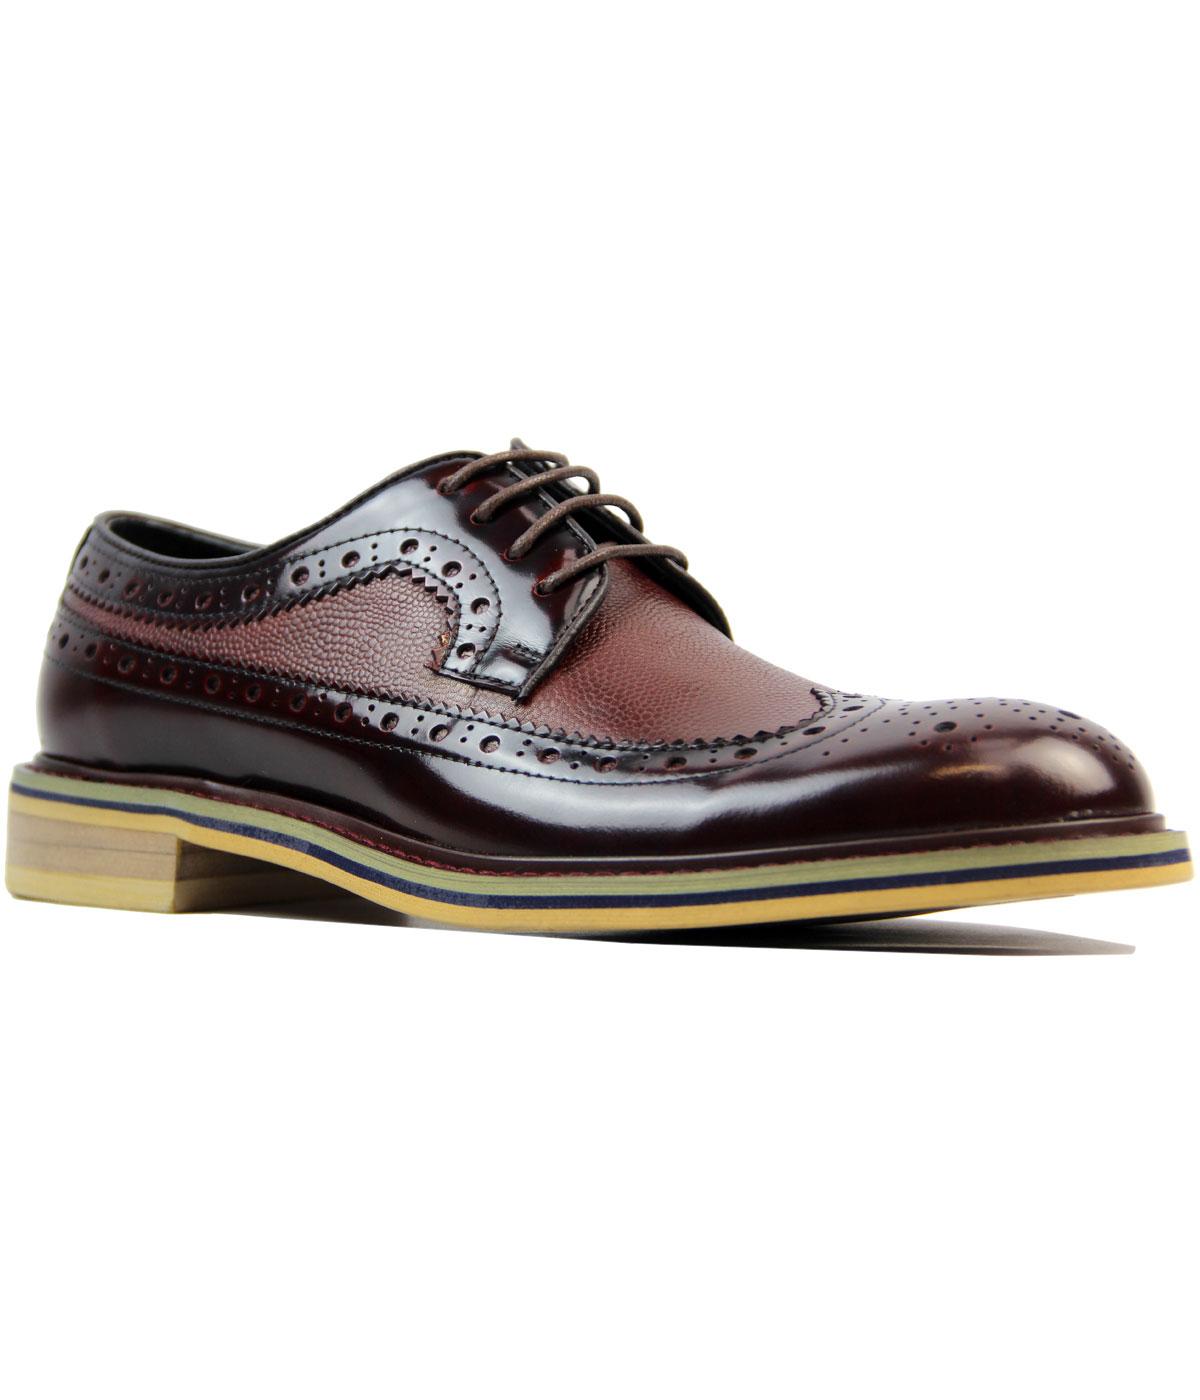 Nodmore PAOLO VANDINI 60s Mod Leather Mix Brogues